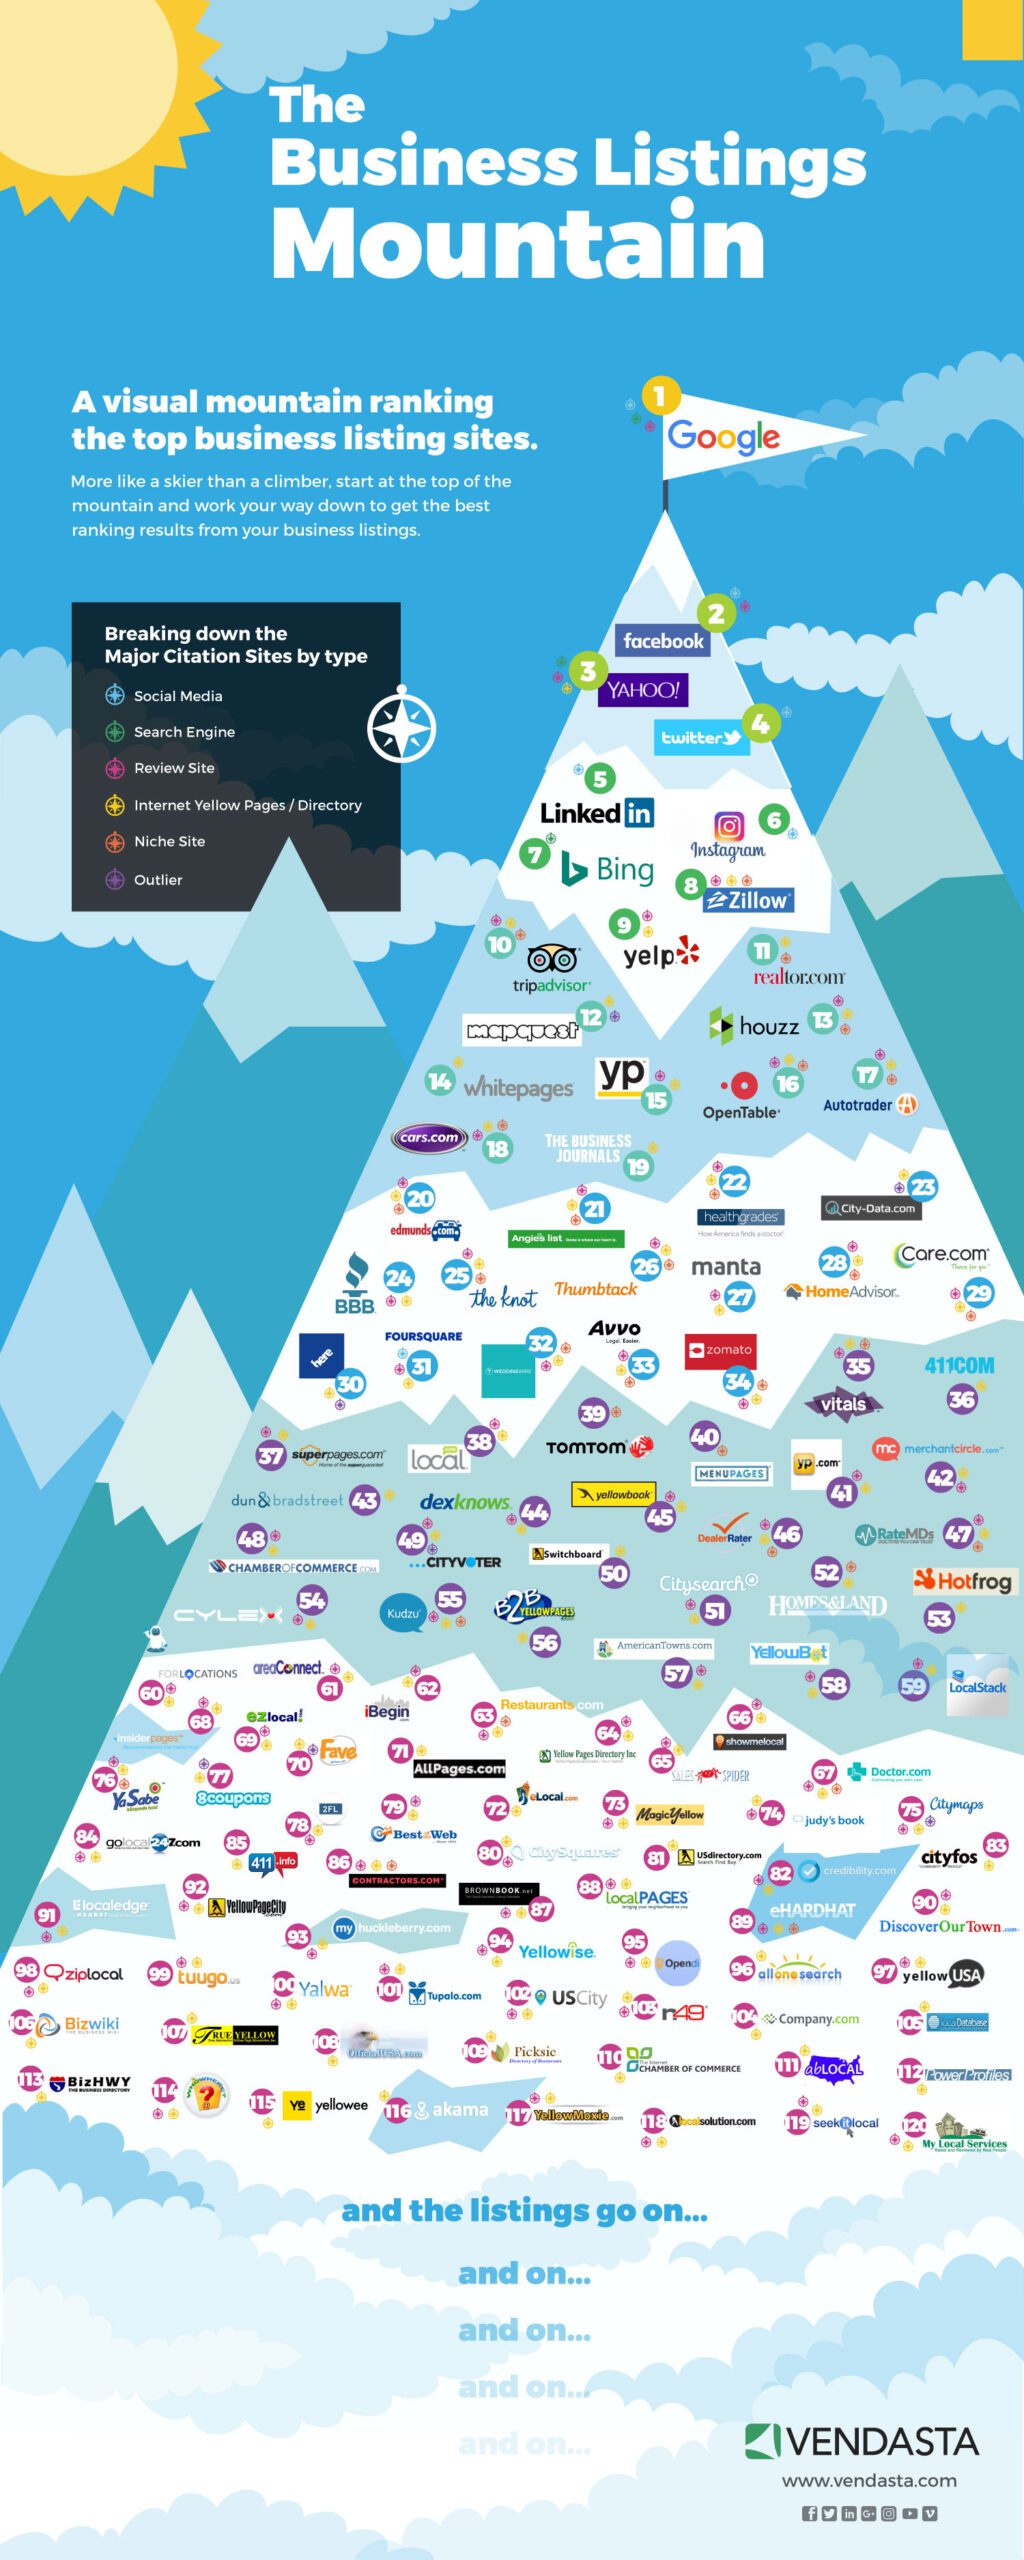 [Infographic] Local Business Listings Mountain